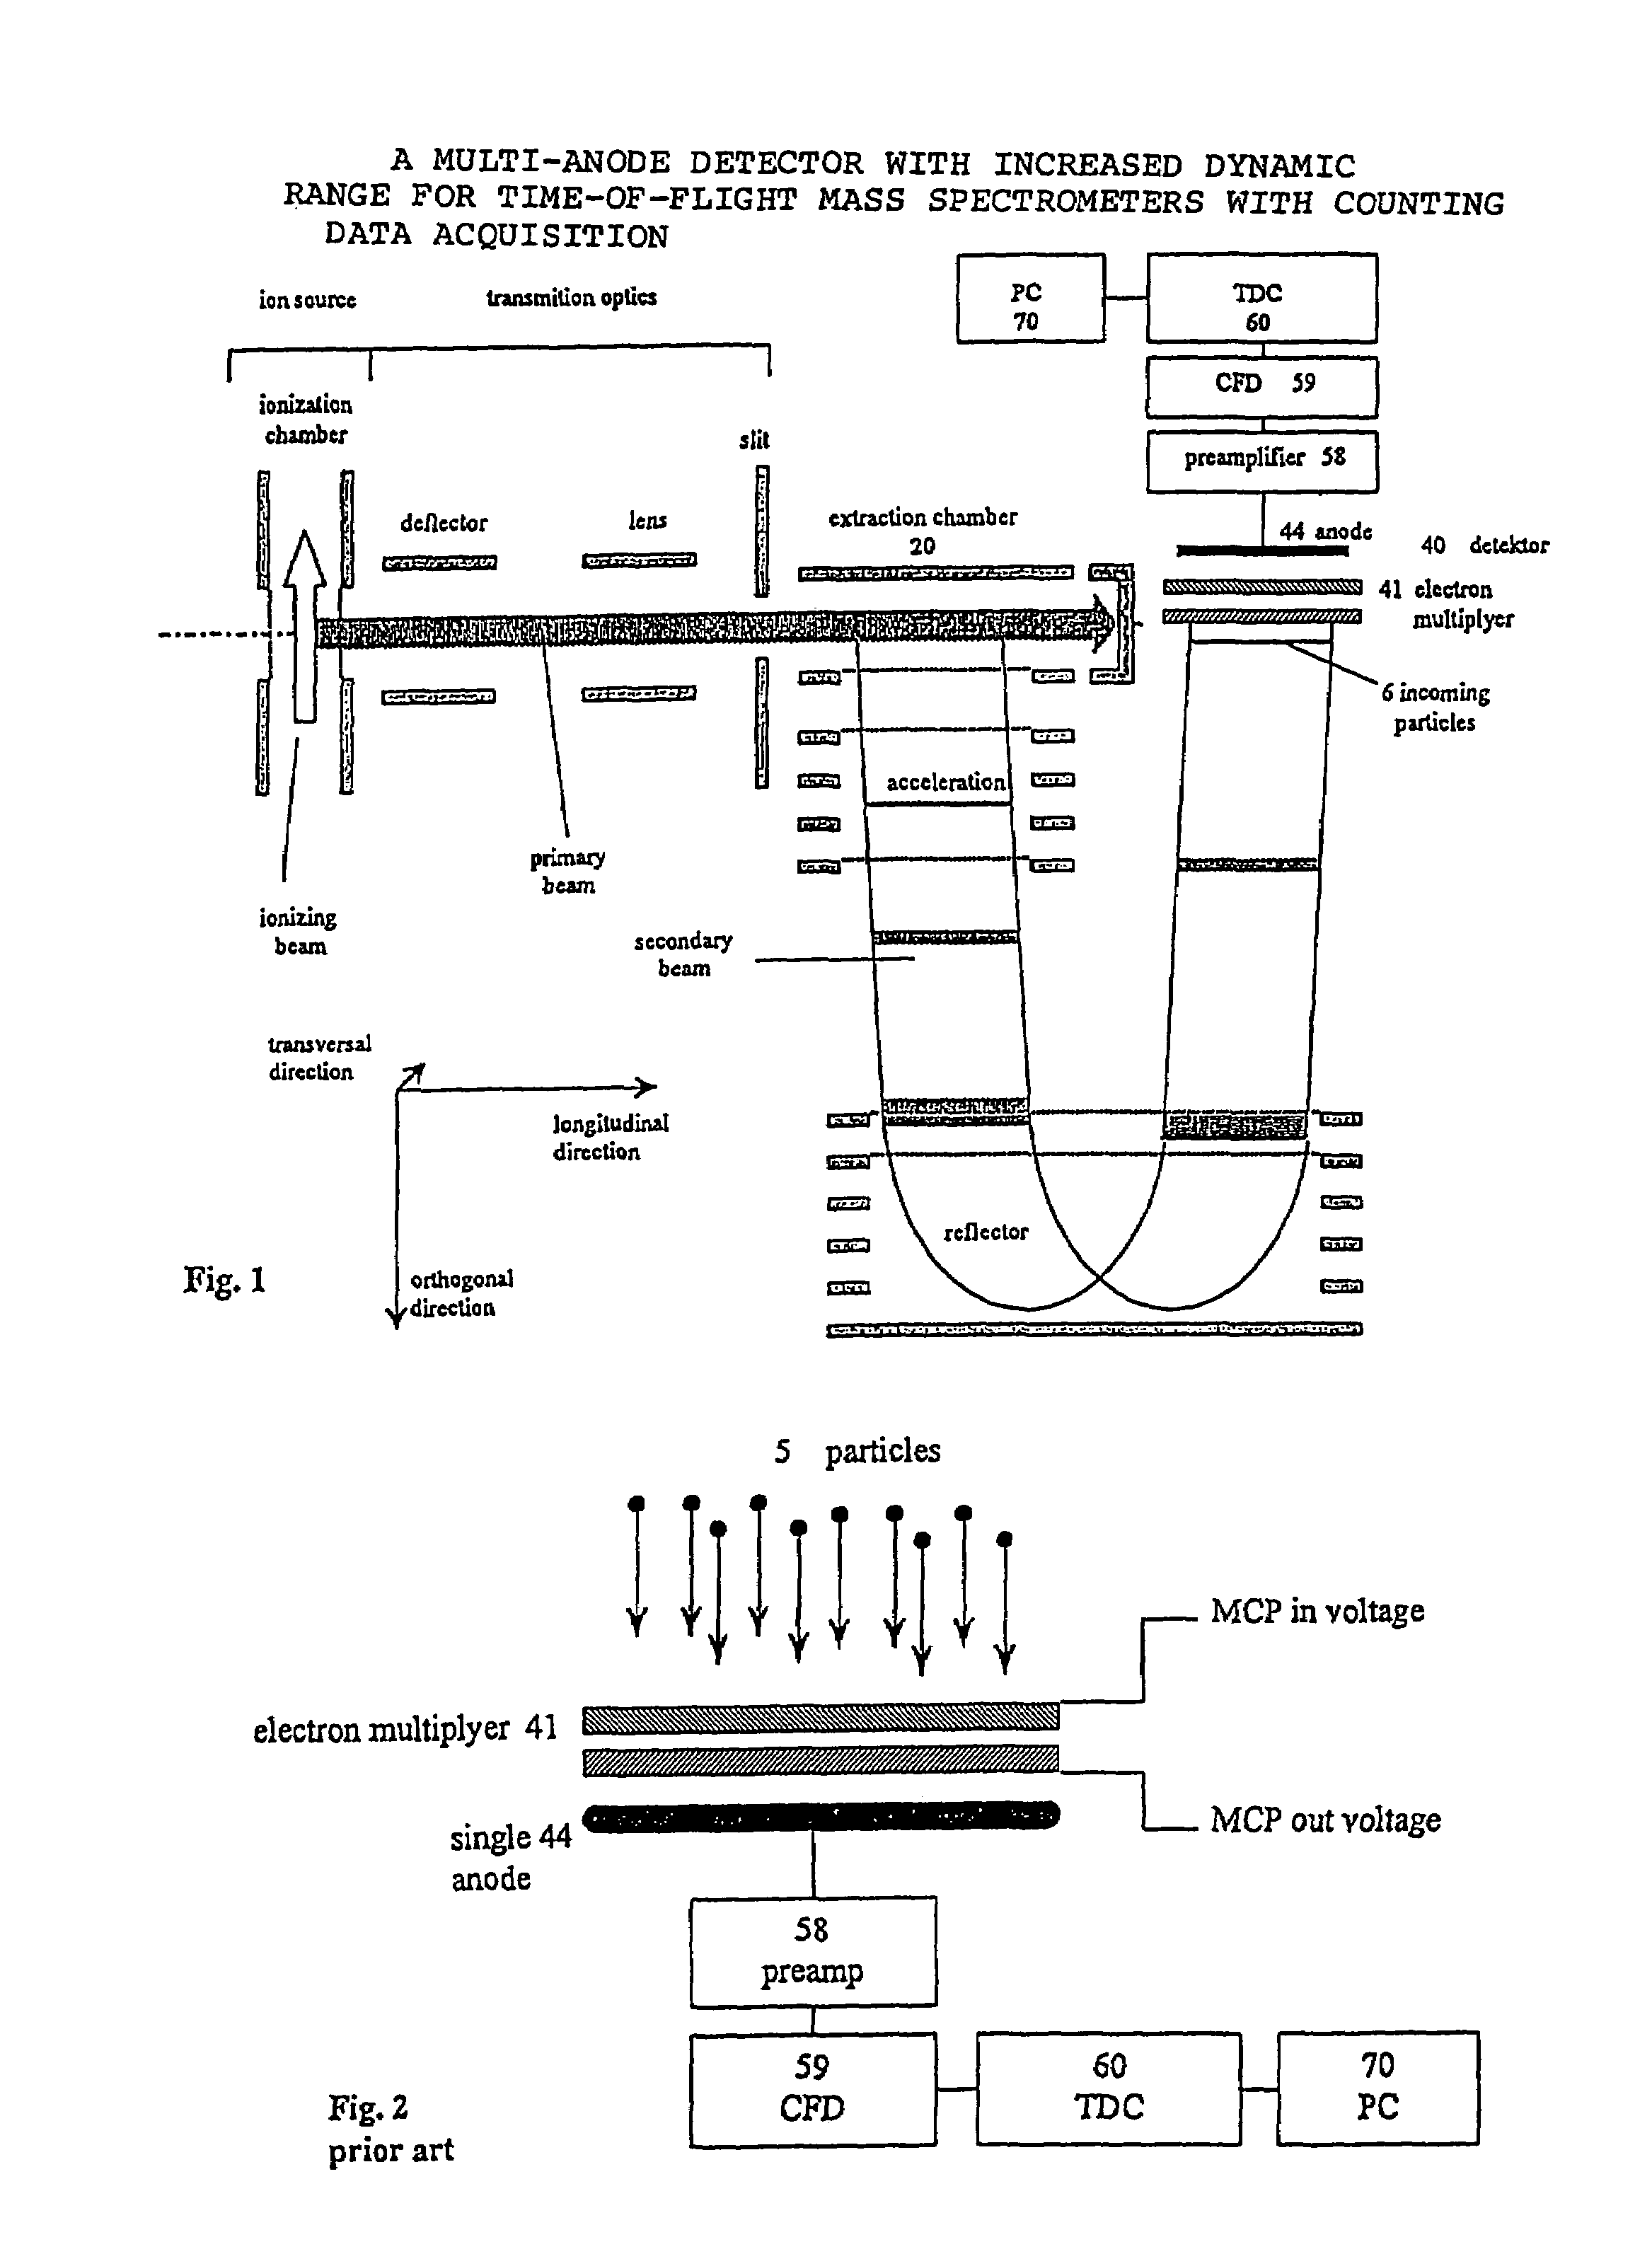 Multi-anode detector with increased dynamic range for time-of-flight mass spectrometers with counting data acquisition